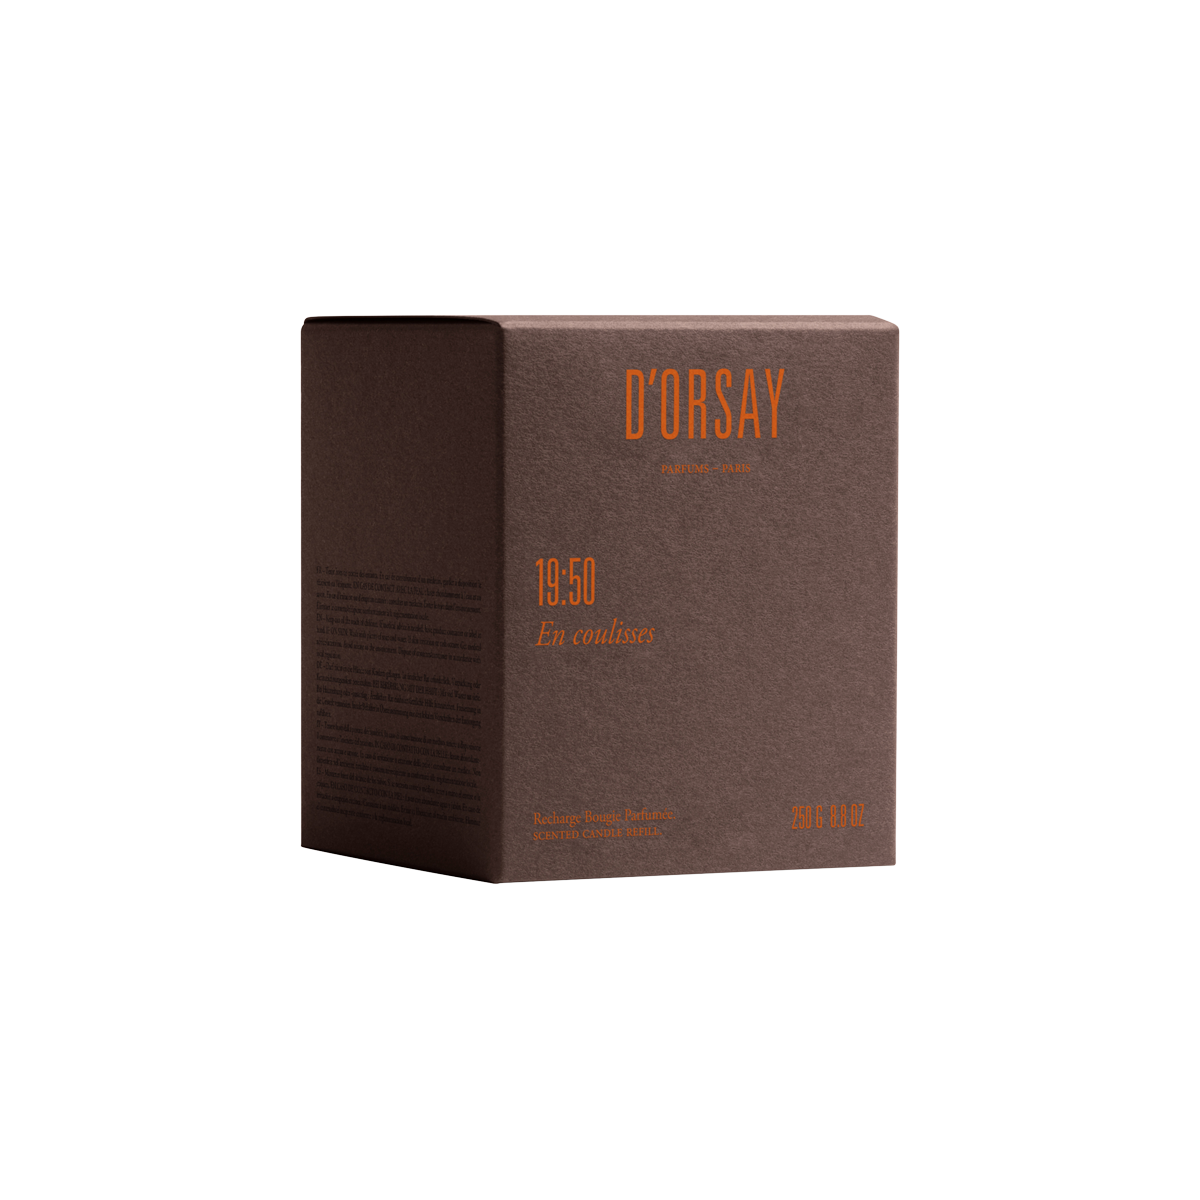 D'Orsay - Scented Candle 19:50 En Coulisses Refill